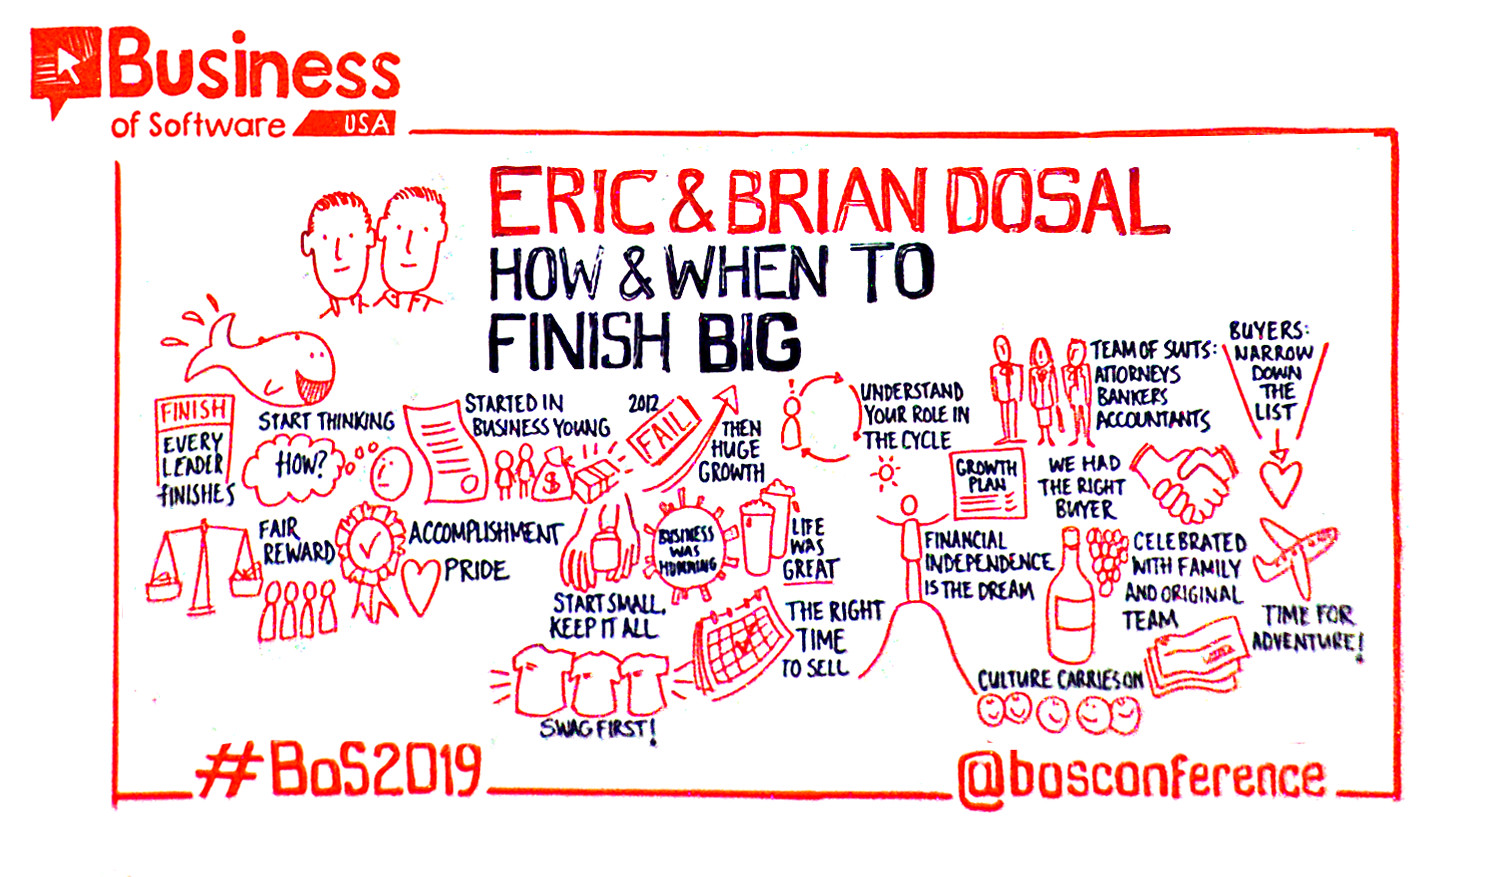 Brian and Ericf Dosal How to finish big sketchnote